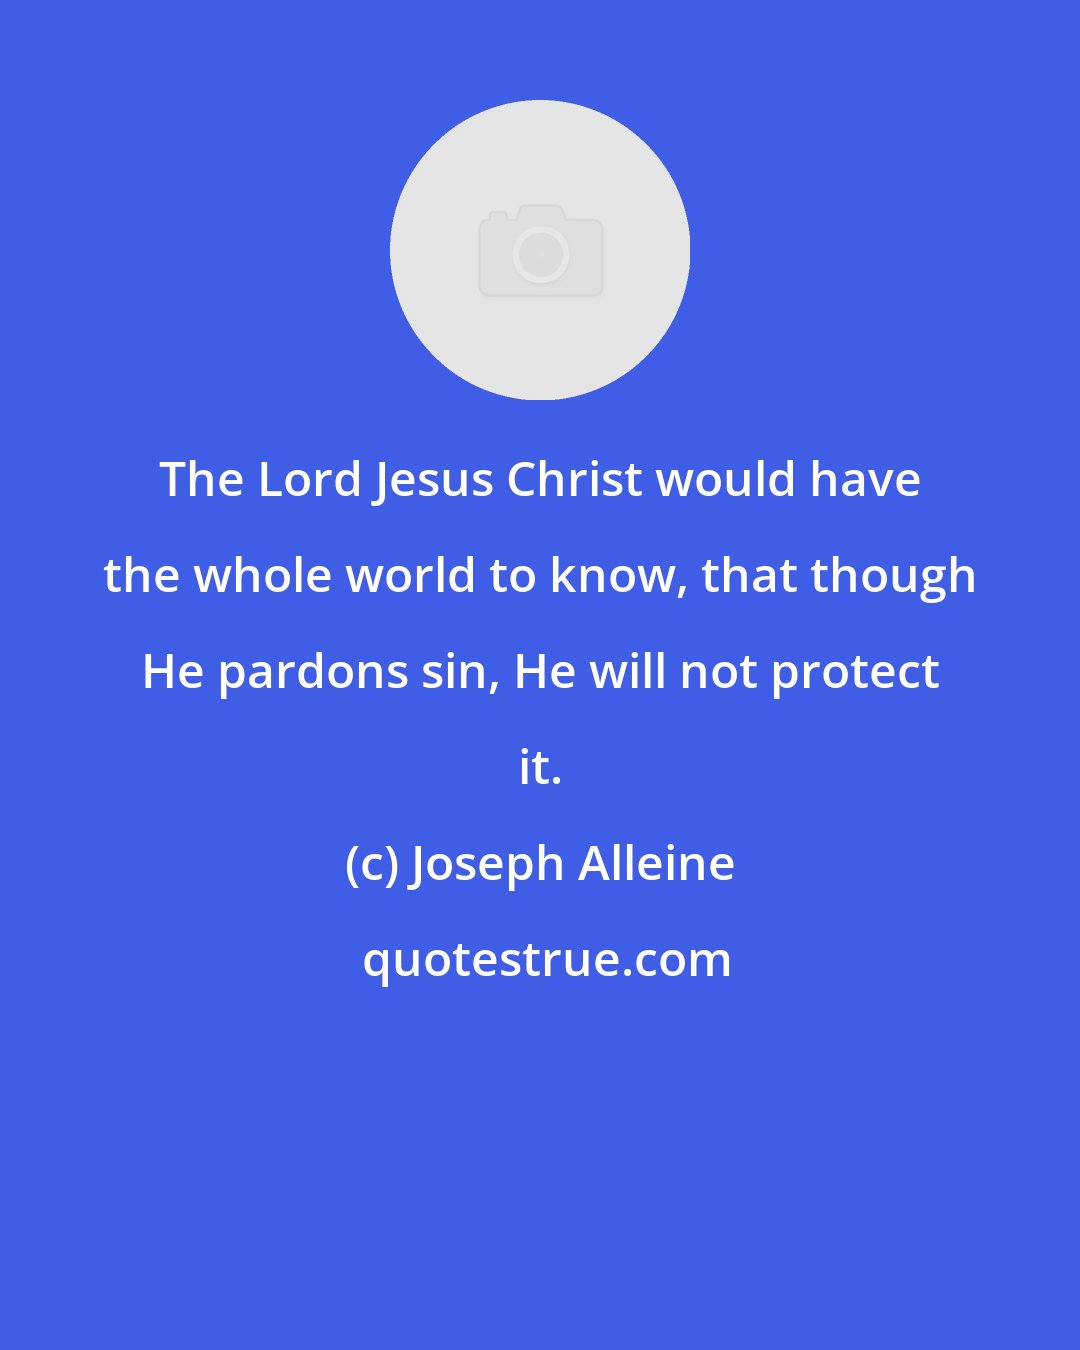 Joseph Alleine: The Lord Jesus Christ would have the whole world to know, that though He pardons sin, He will not protect it.